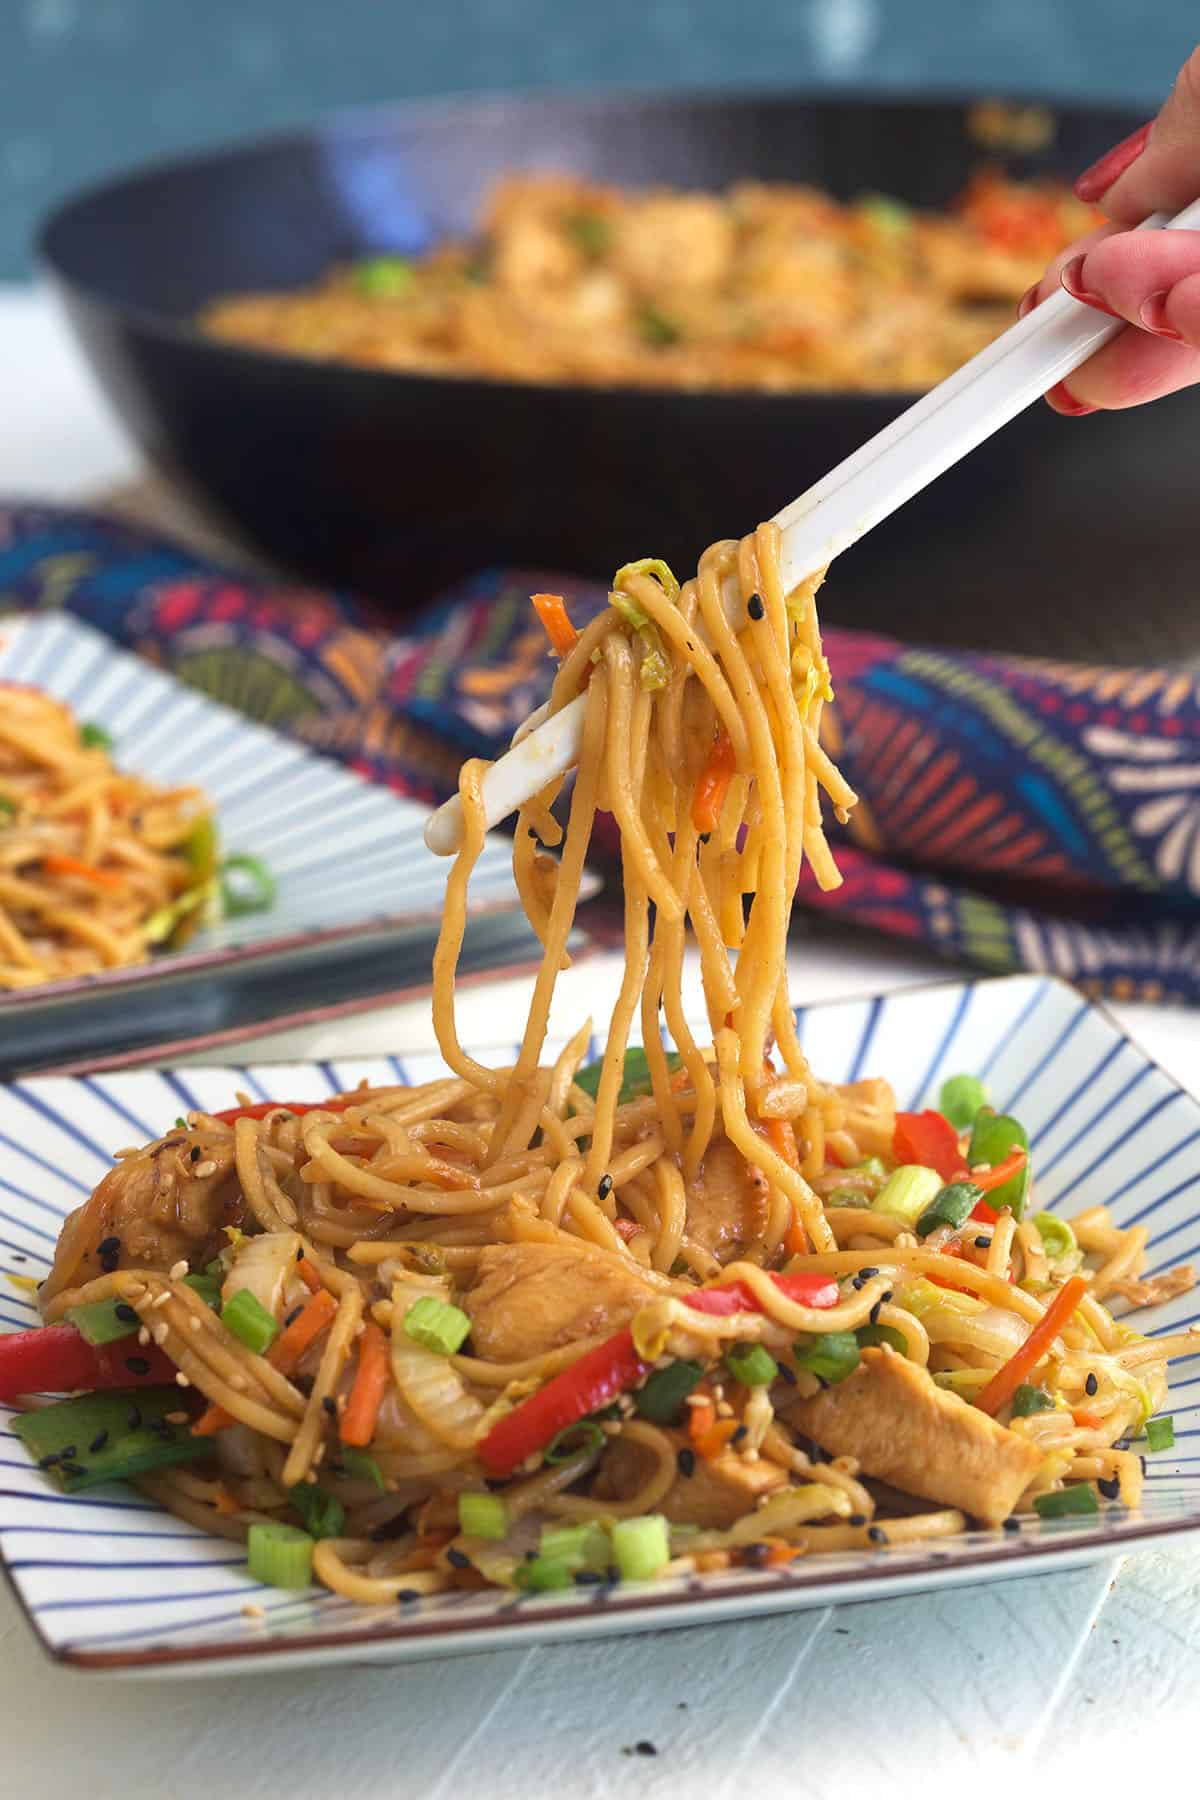 Noodles are being lifted from a plate with a pair of chopsticks. 